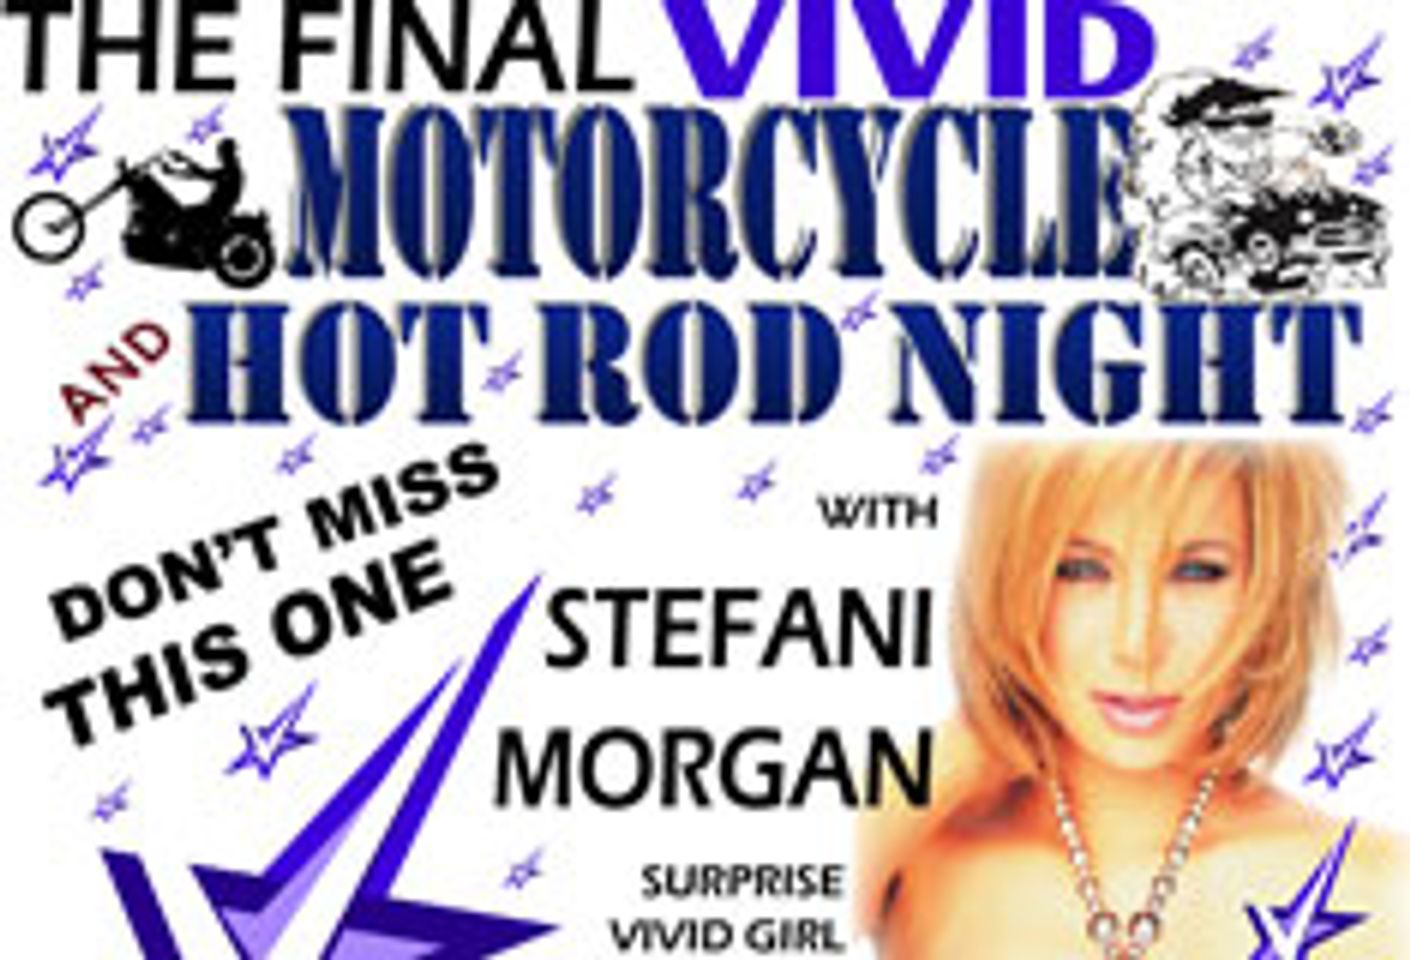 Tiffany Taylor to Host Final Bike and Hot Rod Night